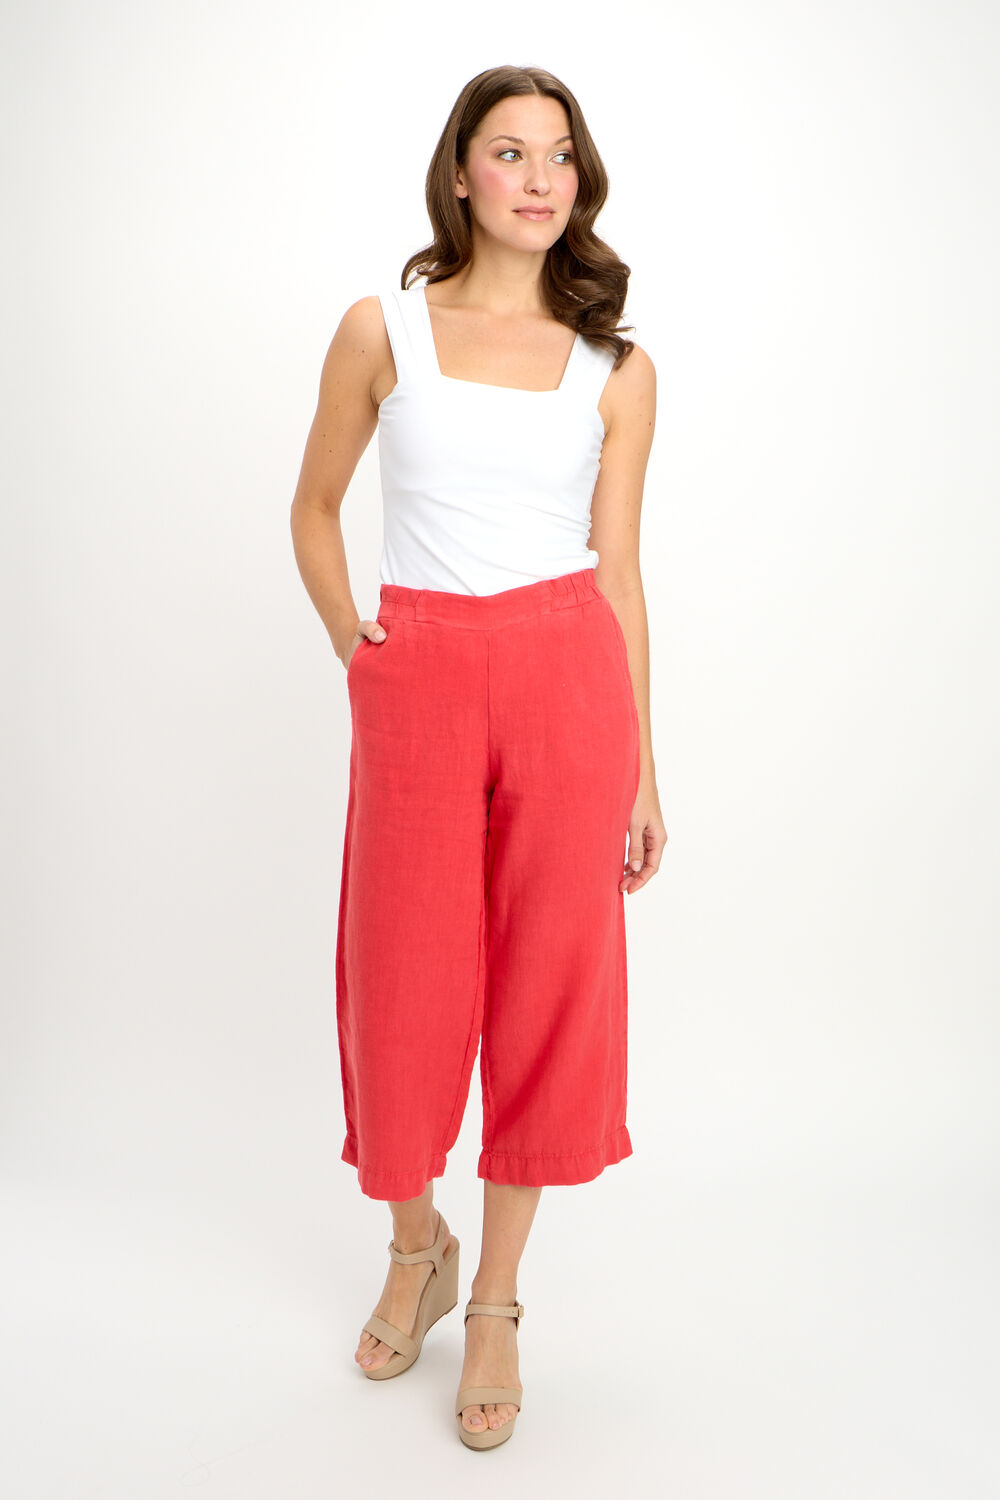 Dolcezza Woven Pant Style 24253. Coral